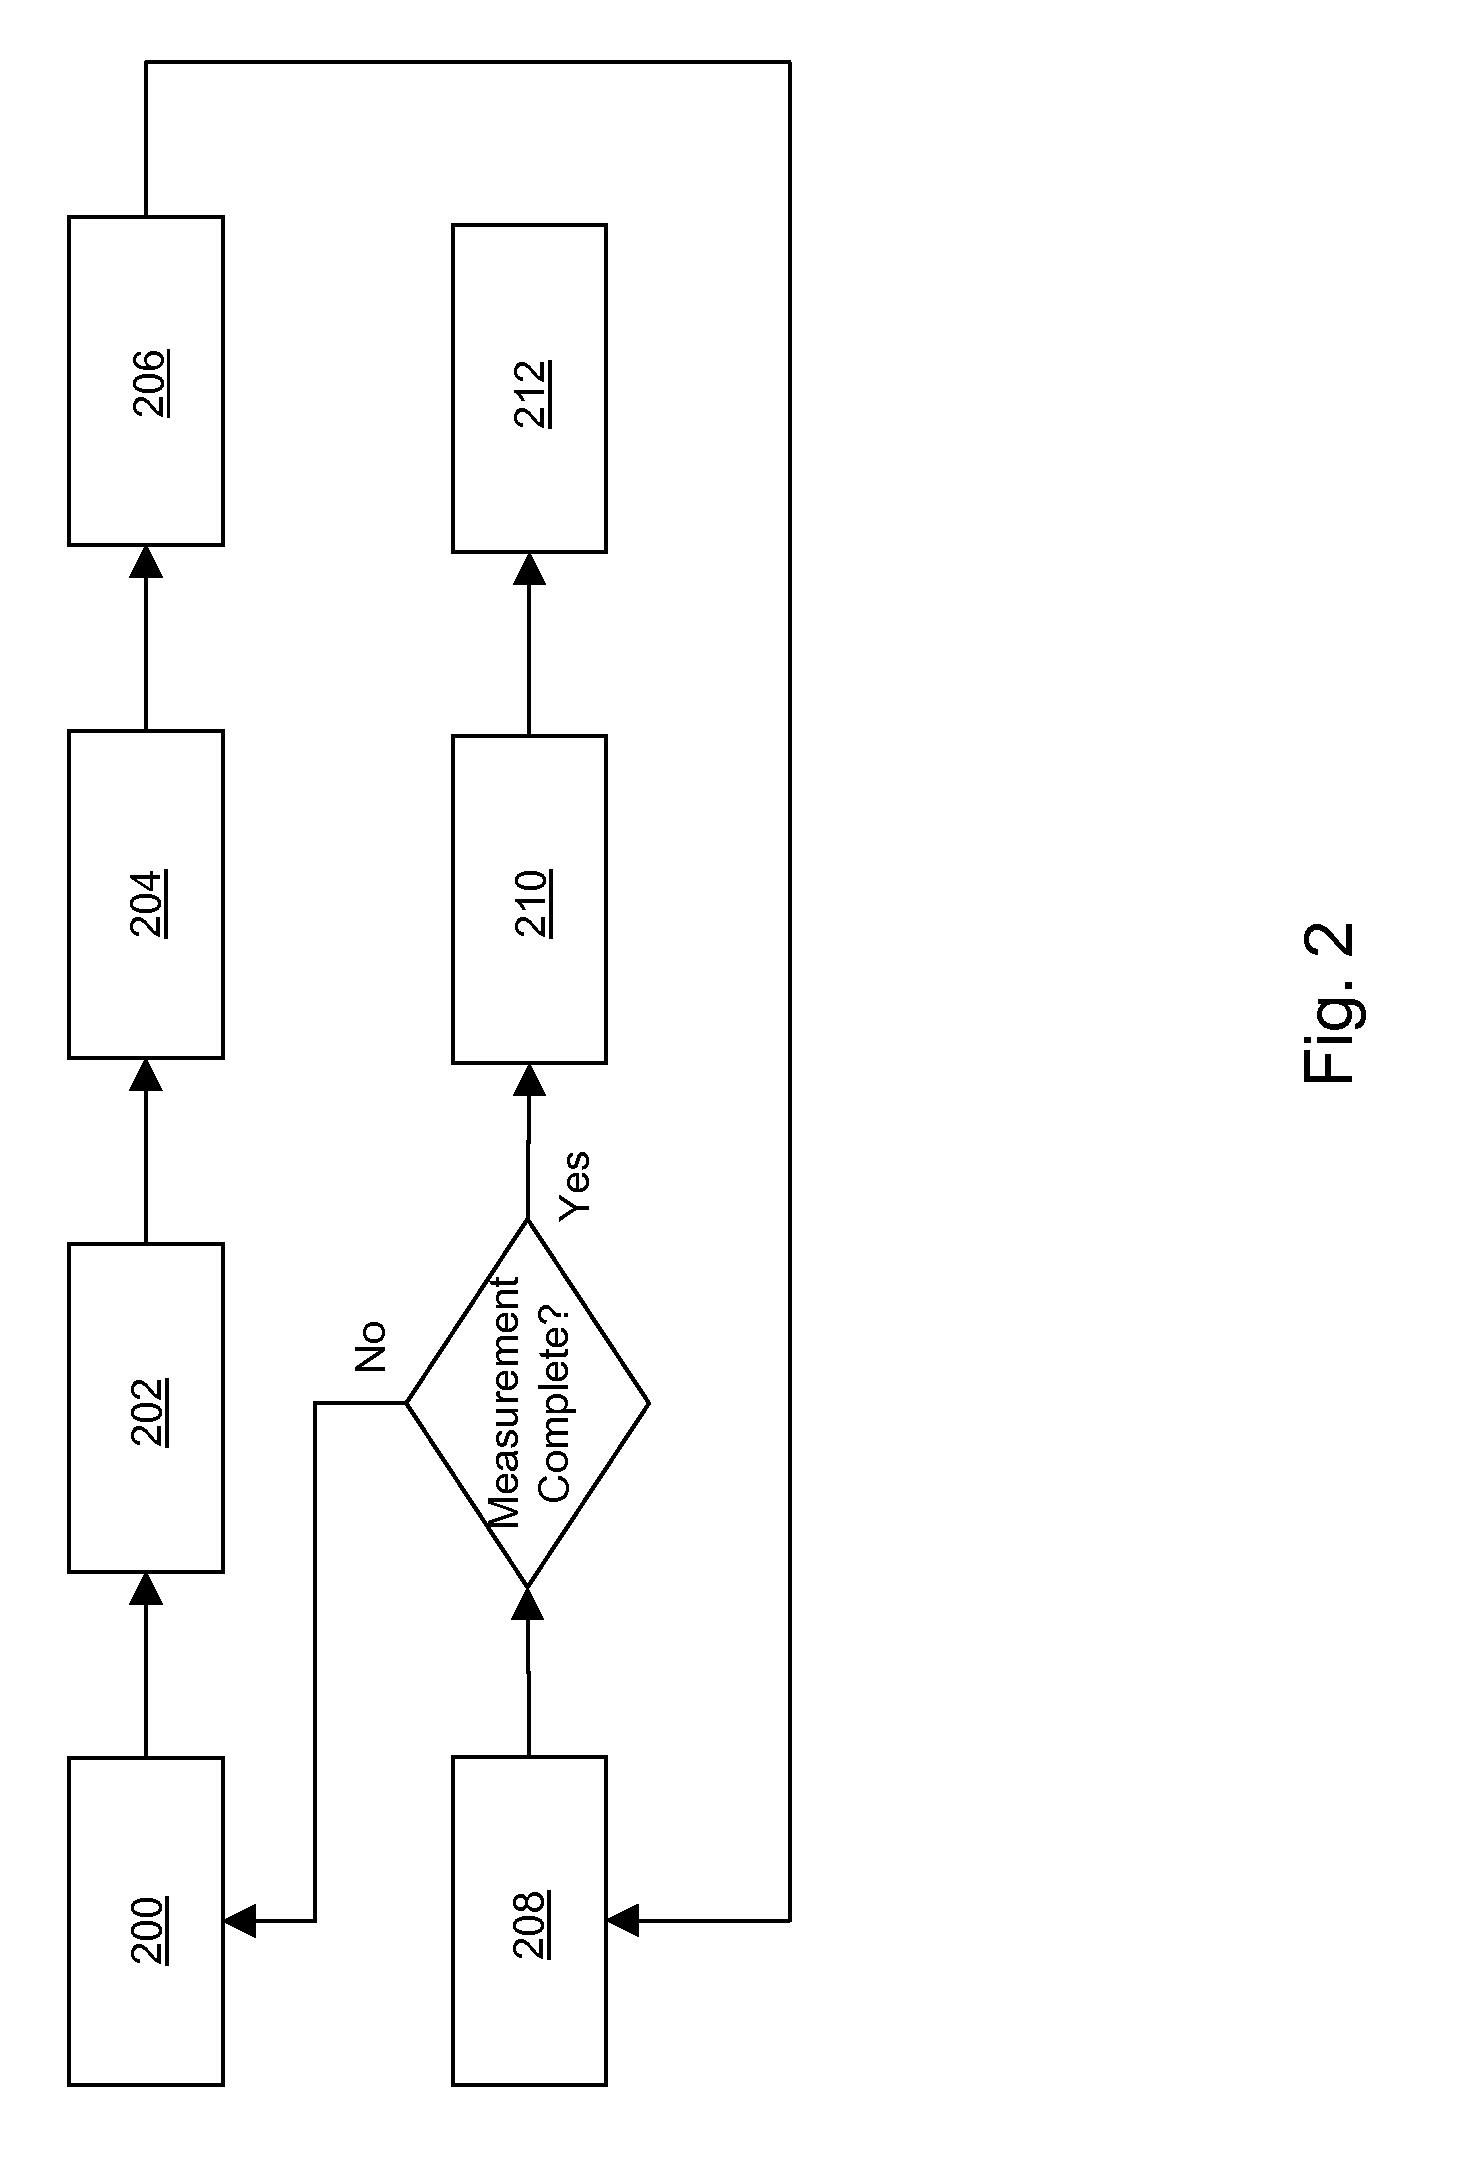 Rotor Assembly System and Method